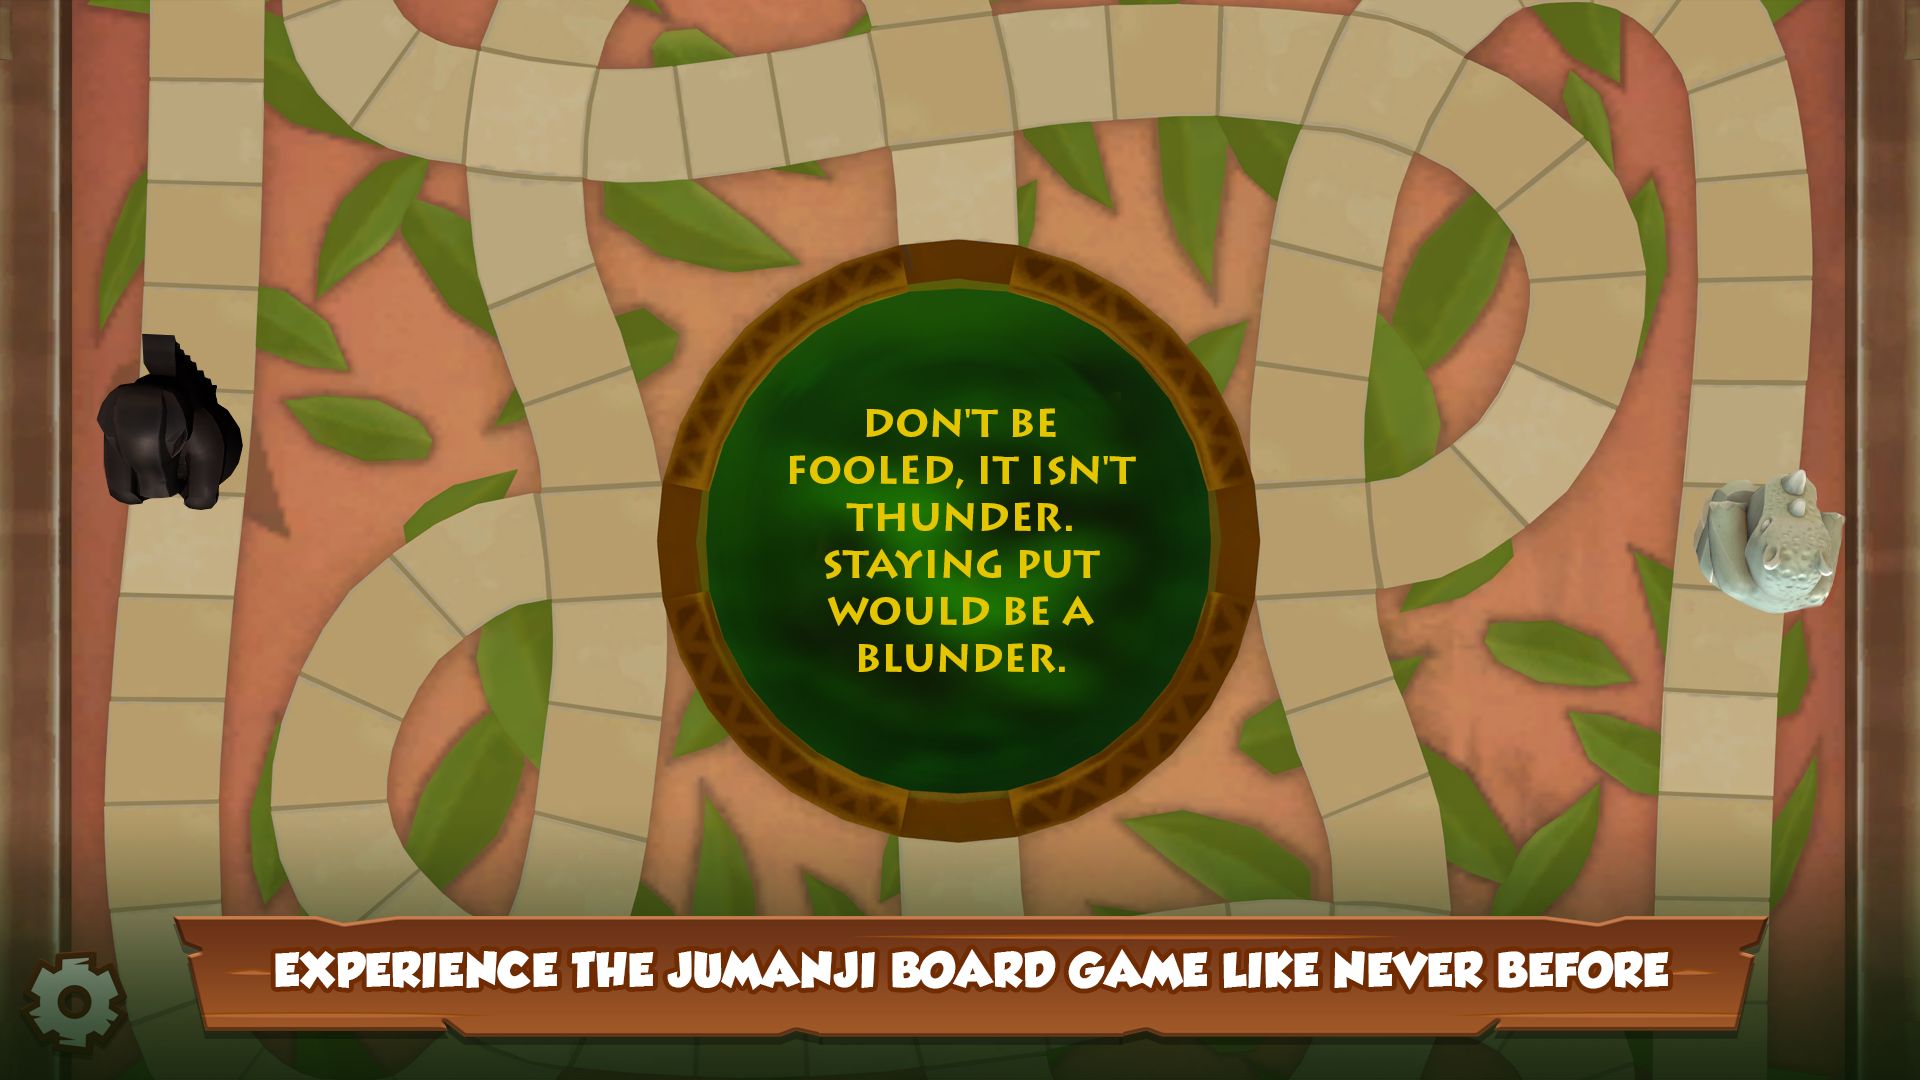 JUMANJI: The Curse Returns for Android